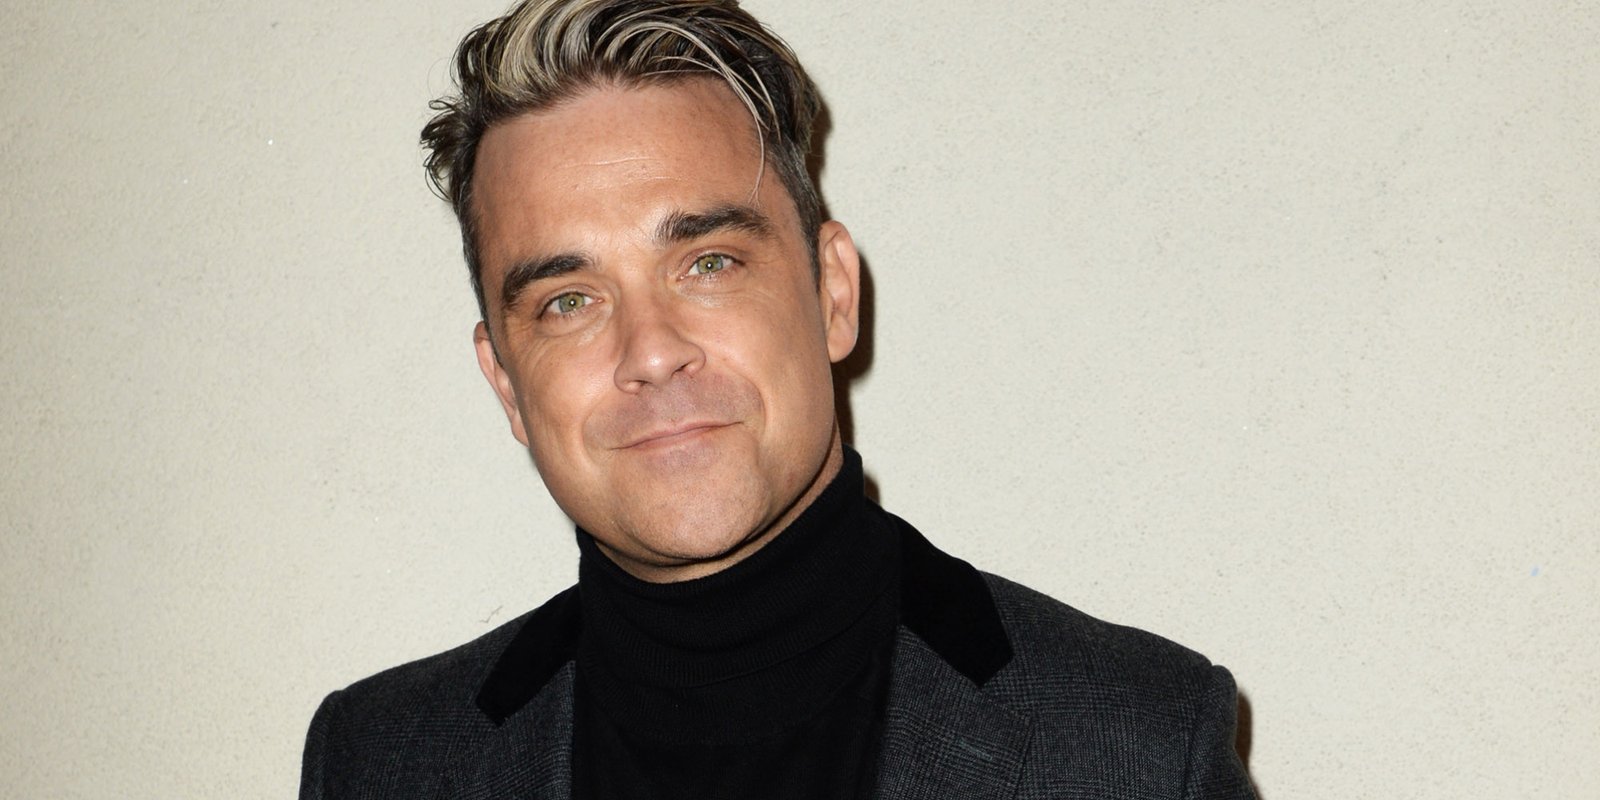 Celebrities who spoke openly about the battle with bipolarity Robbie Williams